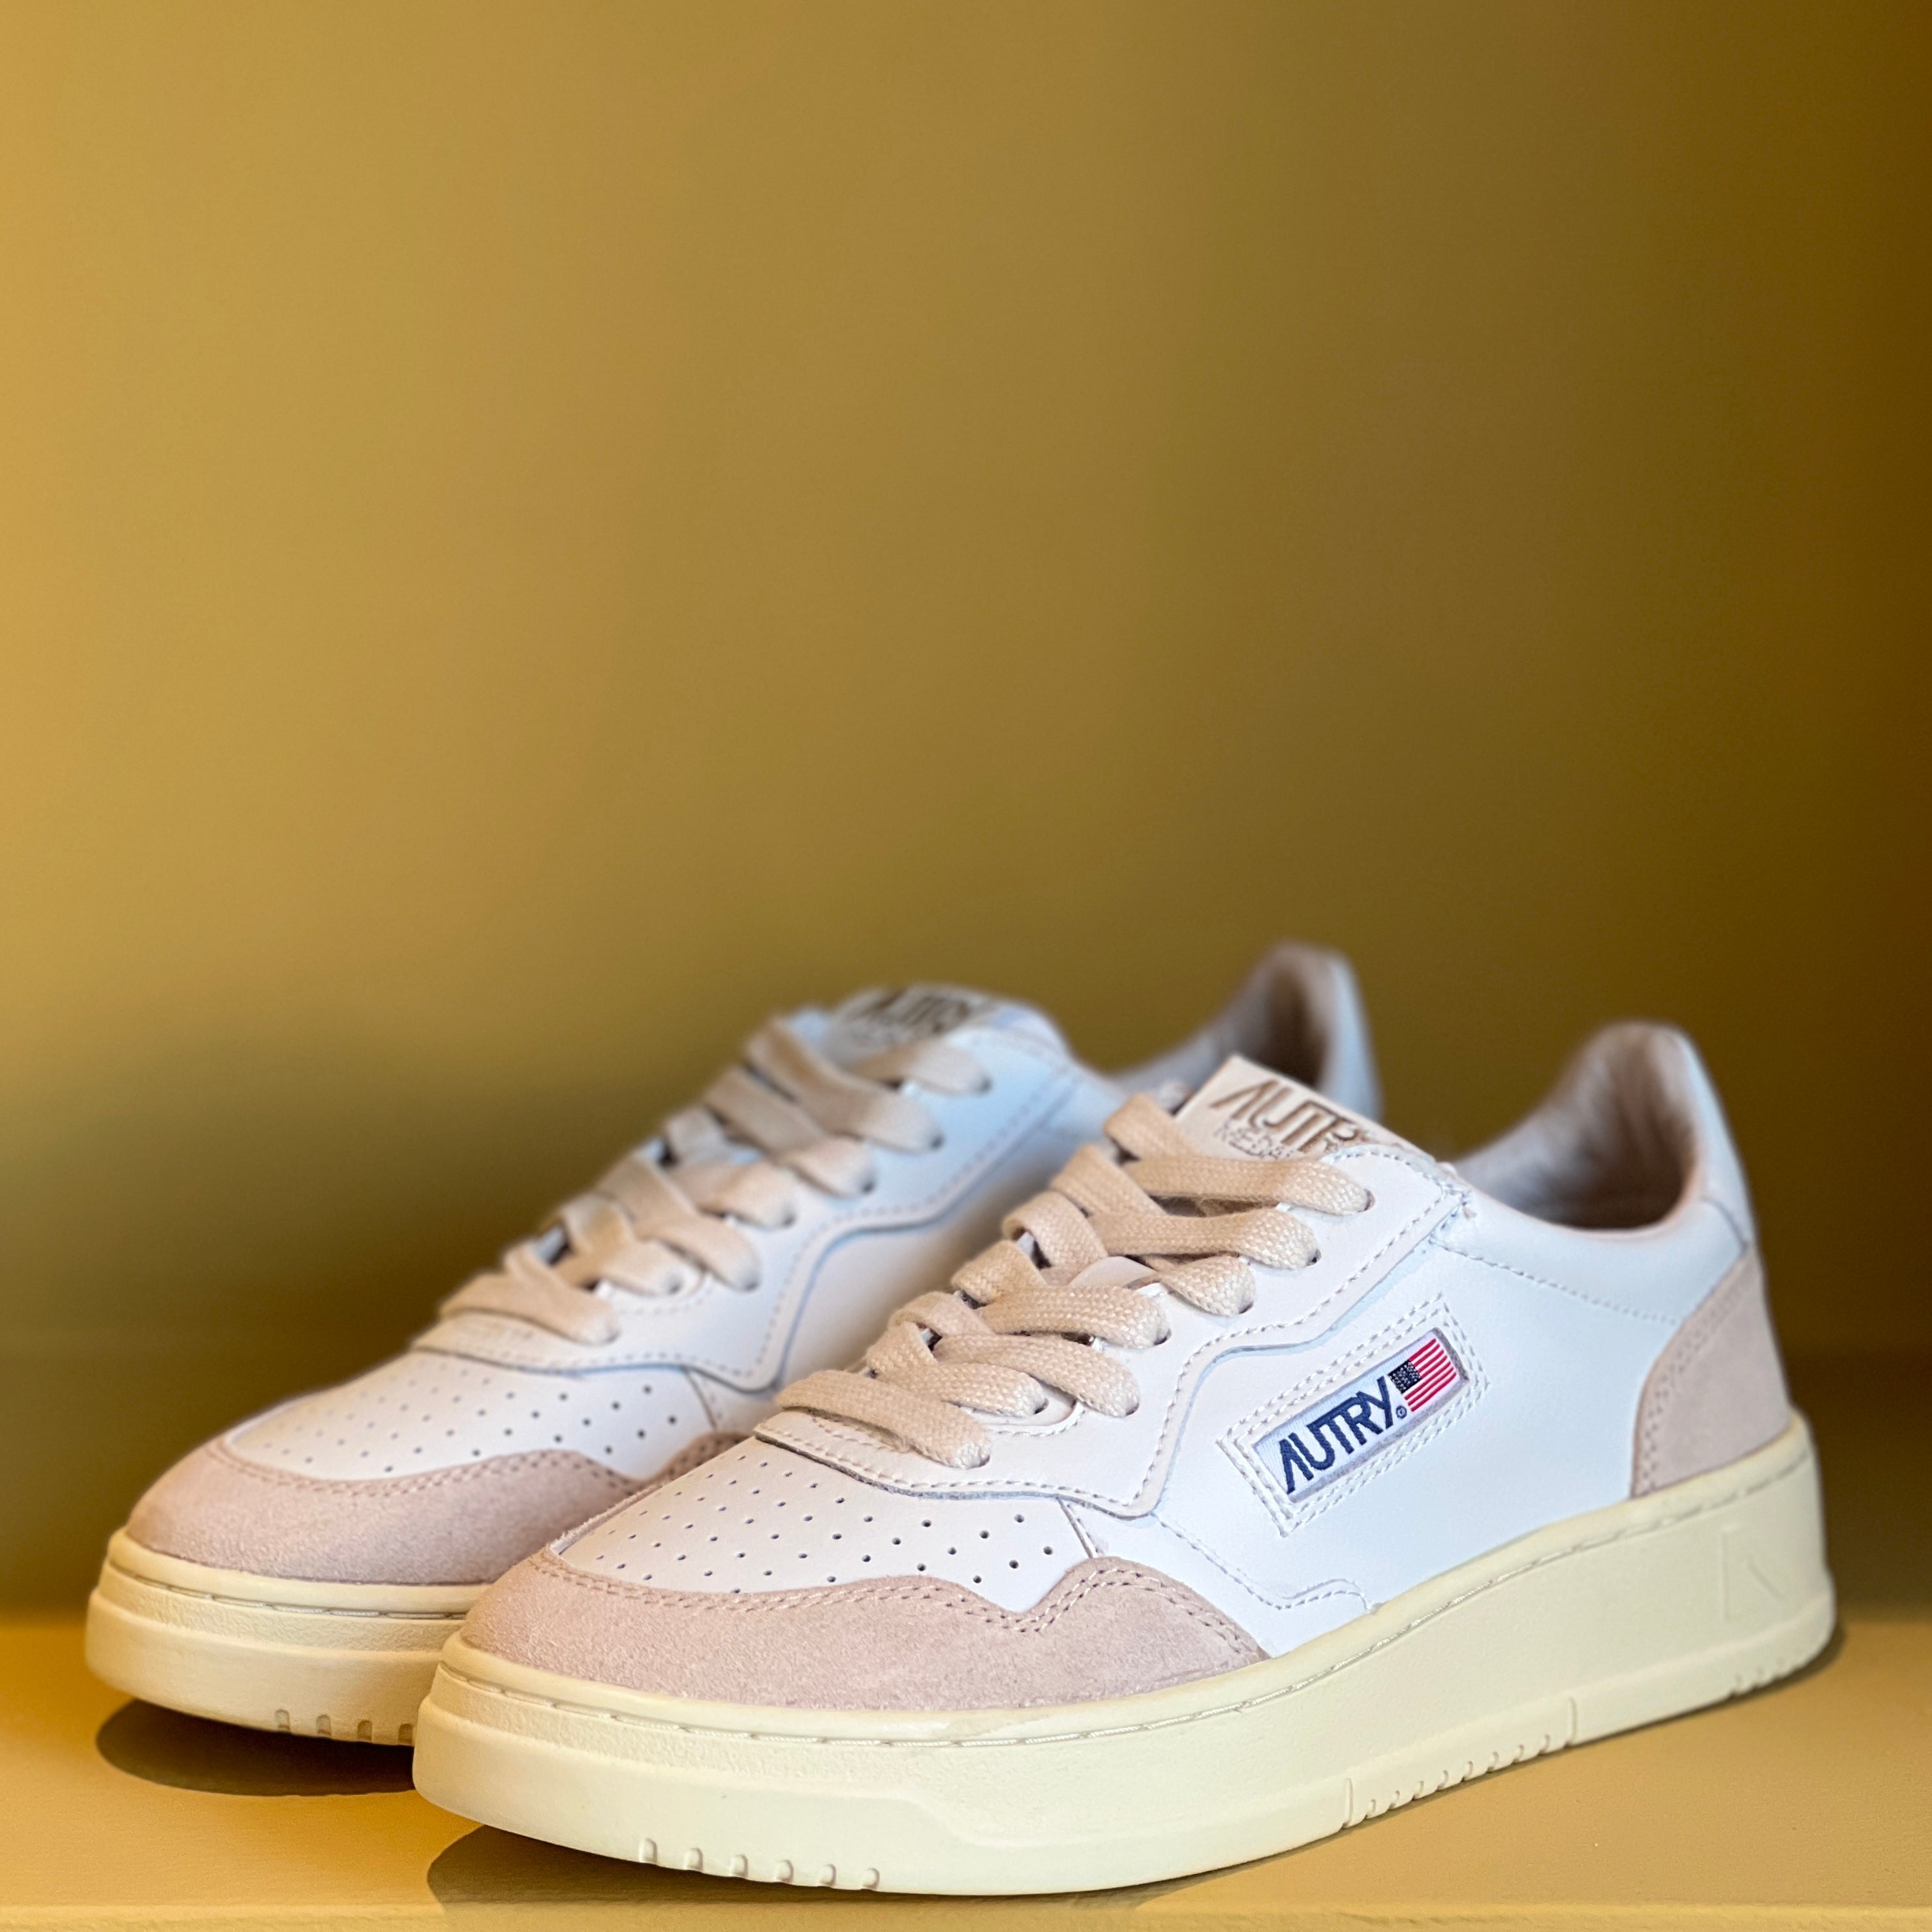 AUTRY - SNEAKERS LOW SUEDE E BIANCO